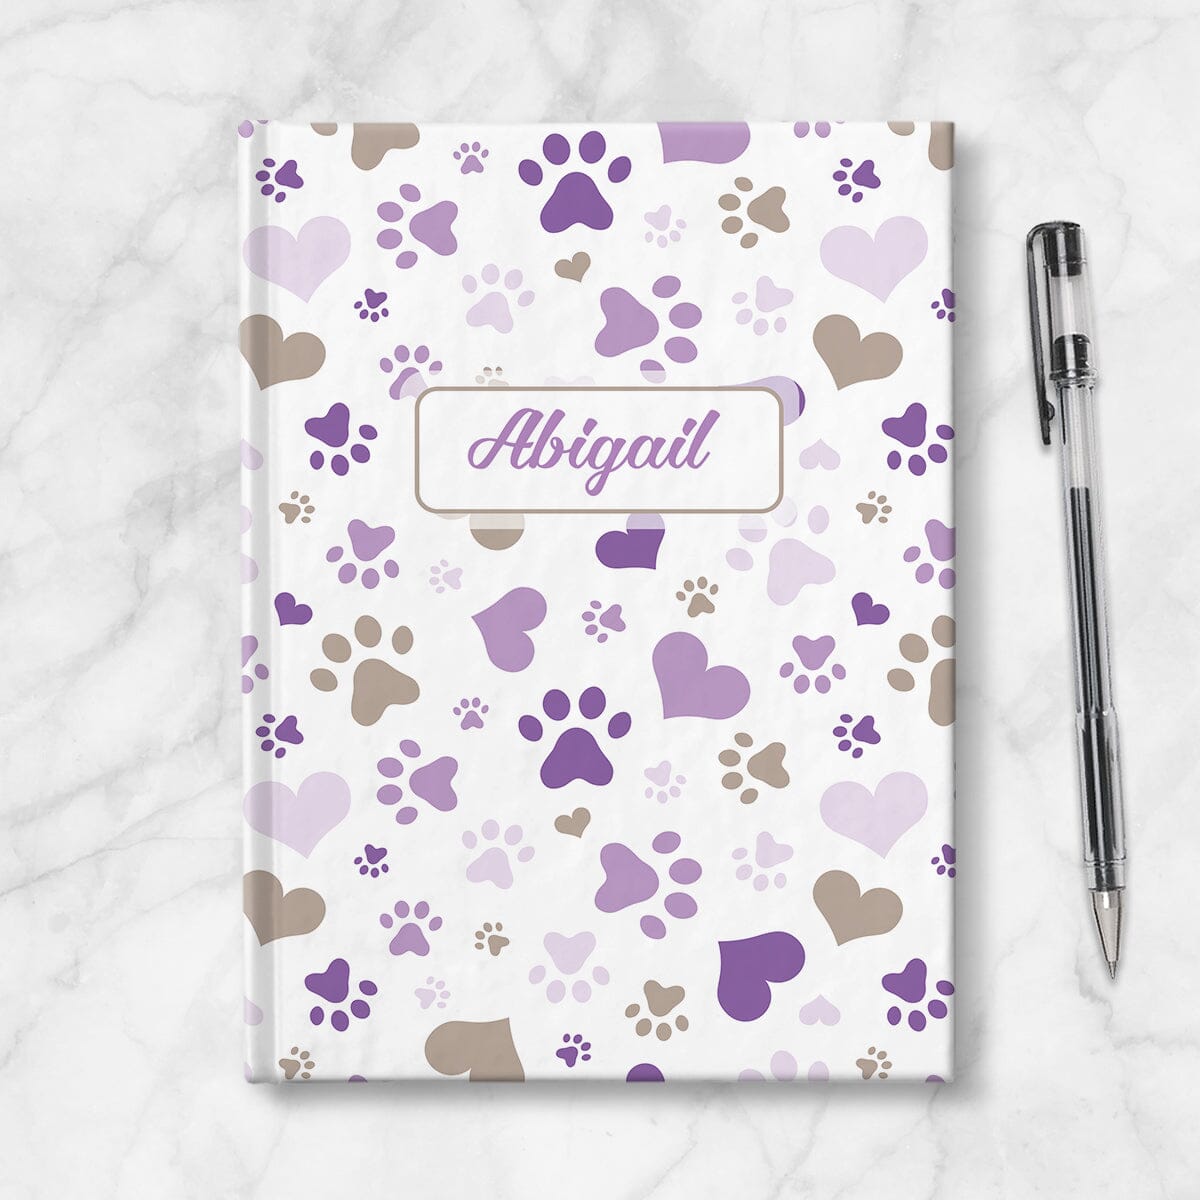 Personalized Purple Hearts and Paw Prints Journal at Artistically Invited. Image shows the book on a countertop next to a pen.